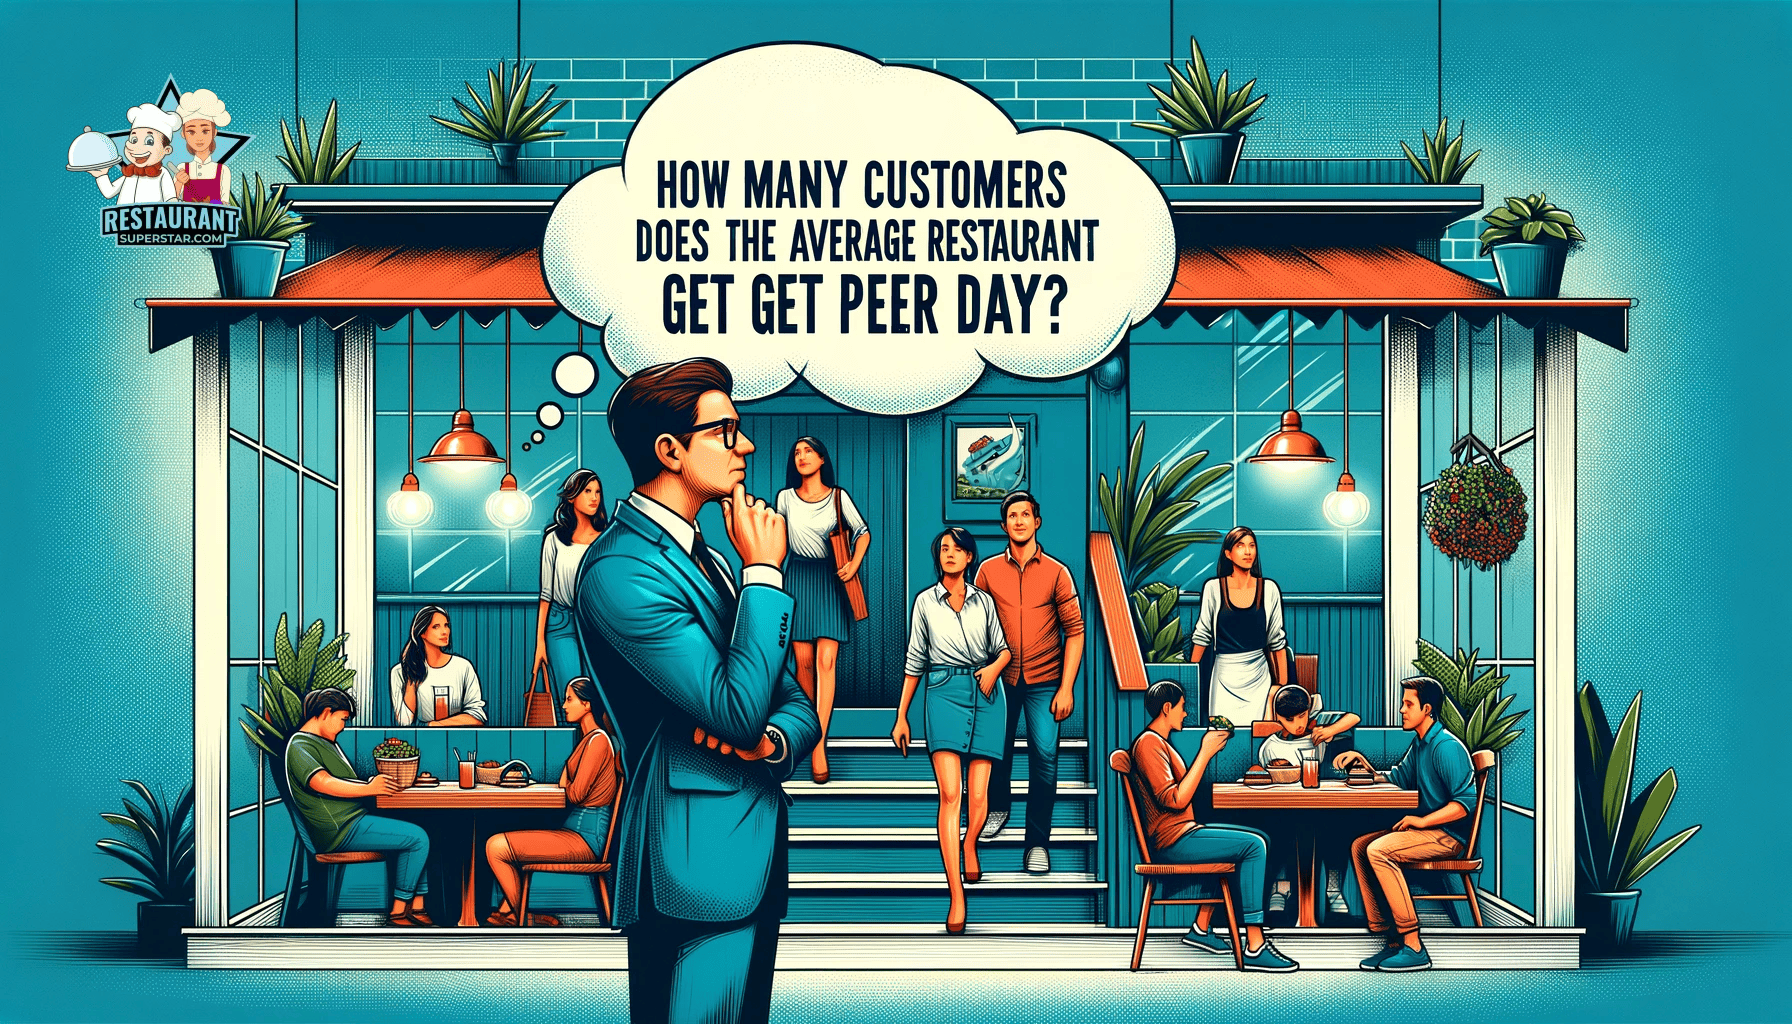 How Many Customers Does the Average Restaurant Get Per Day?